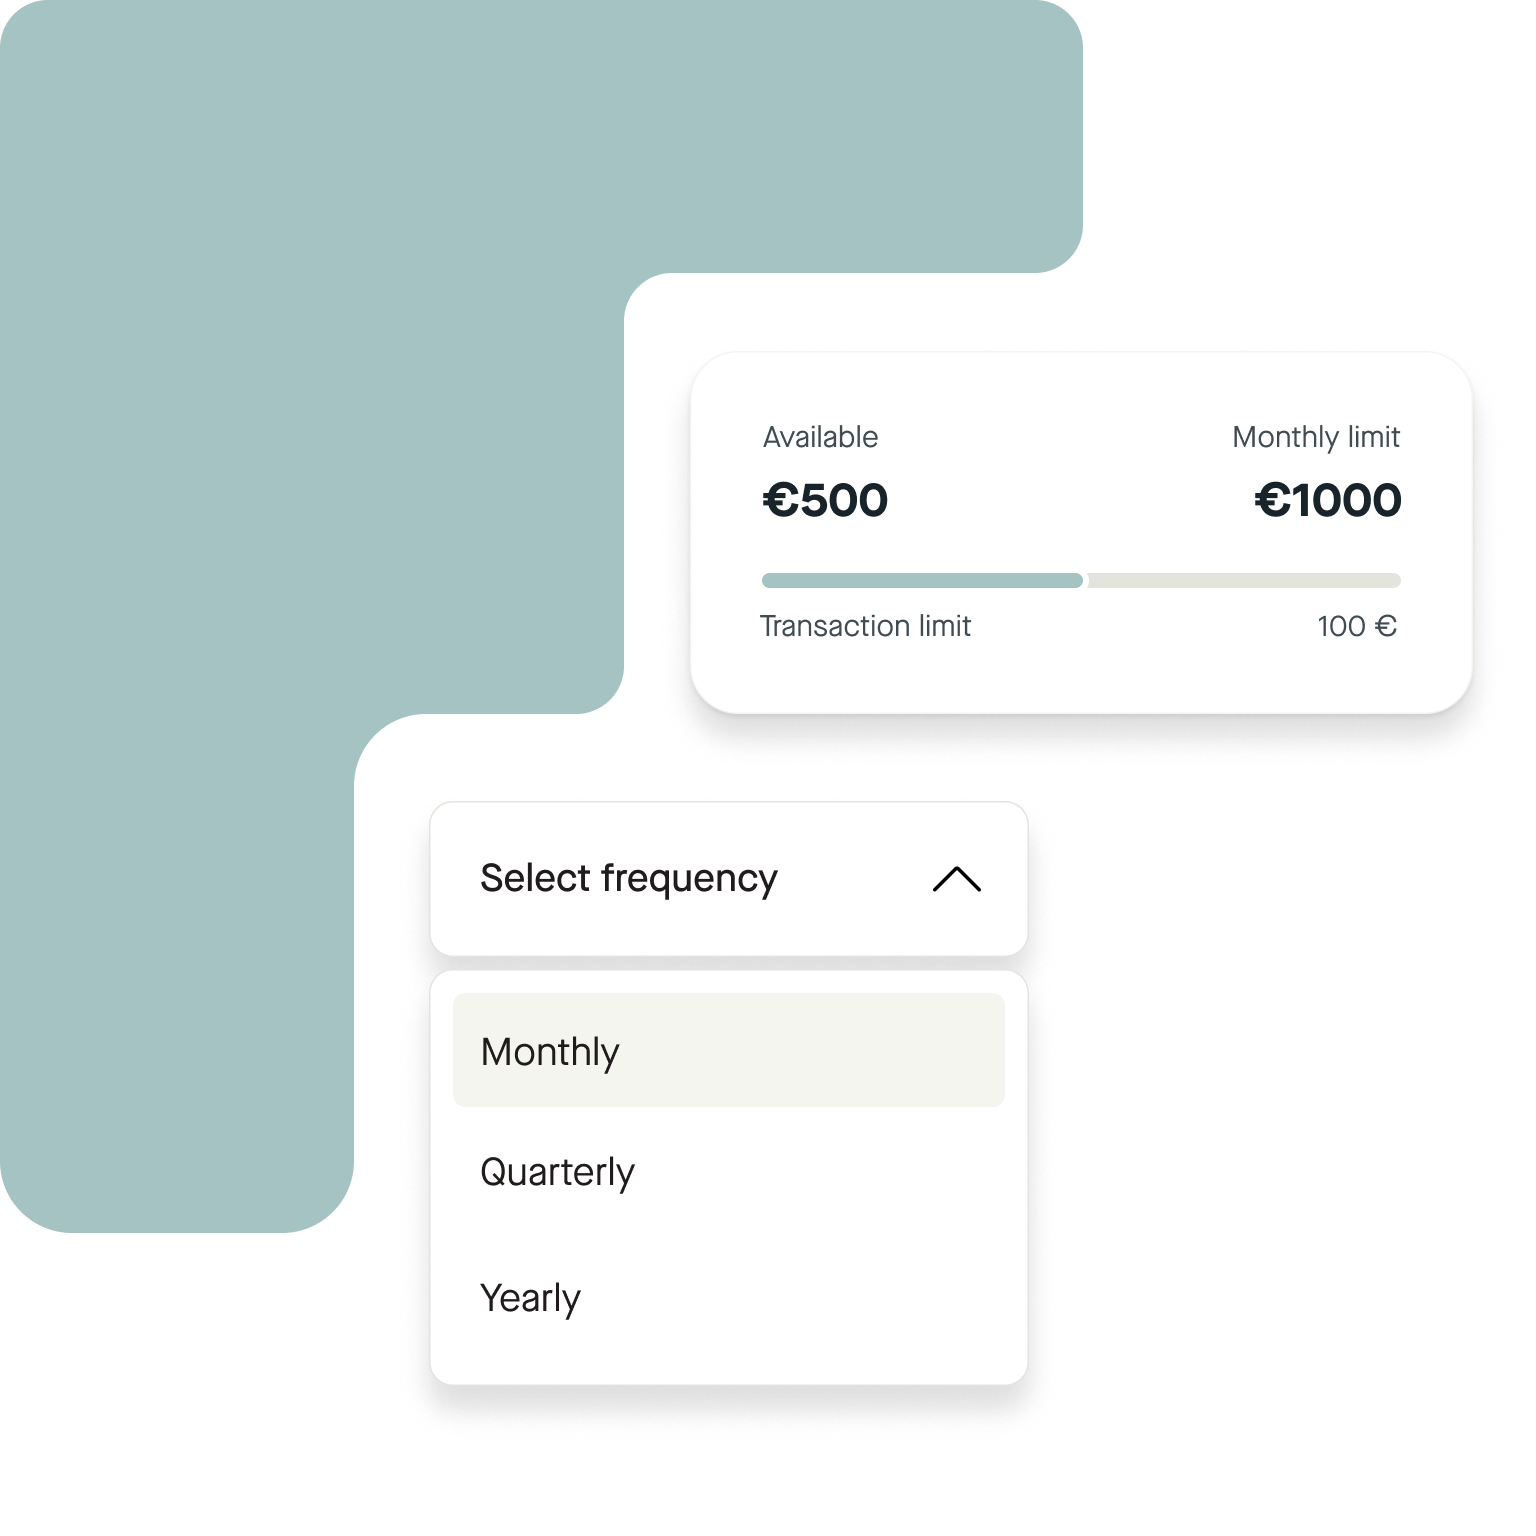 Pliant's multi-use virtual credit cards for every use case